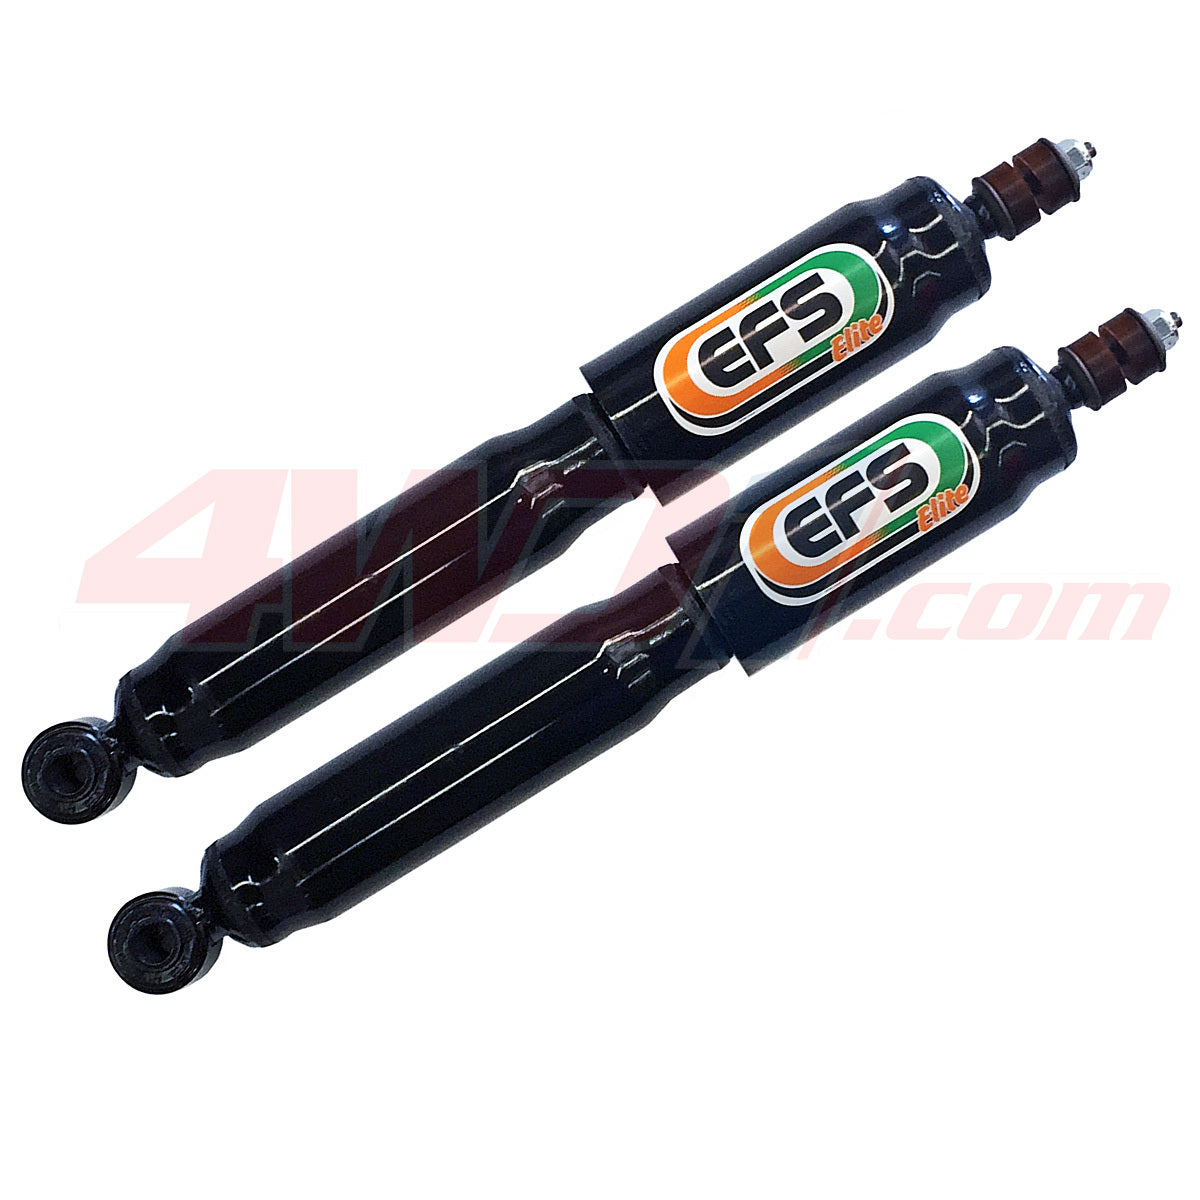 EFS ELITE REAR SHOCKS LAND ROVER DISCOVERY SERIES 1